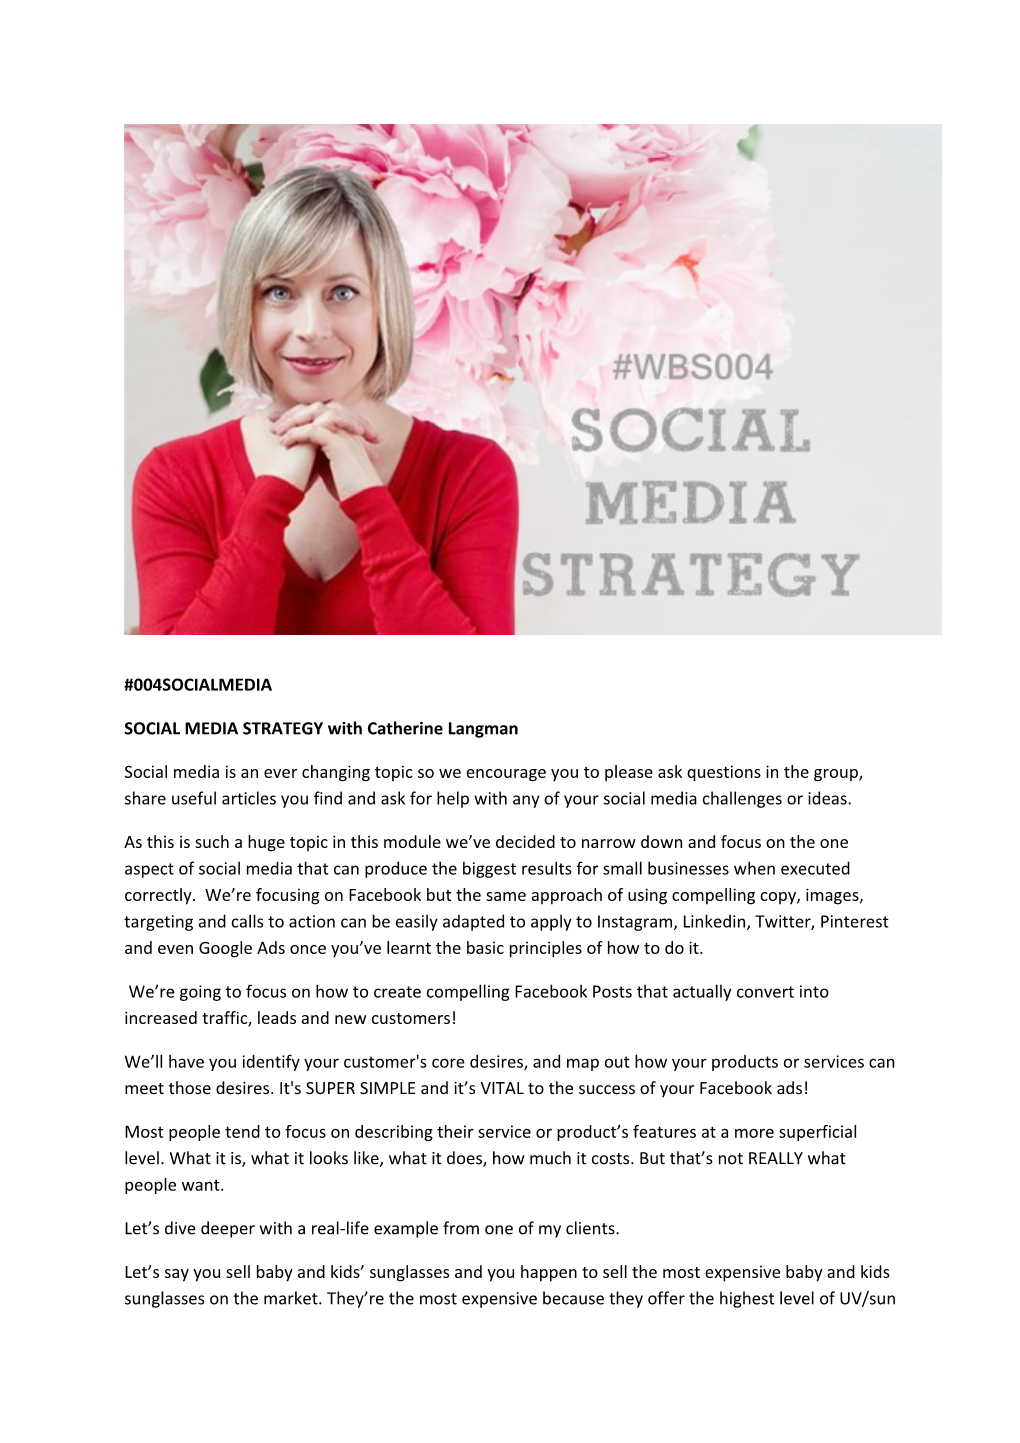 SOCIAL MEDIA STRATEGY with Catherine Langman